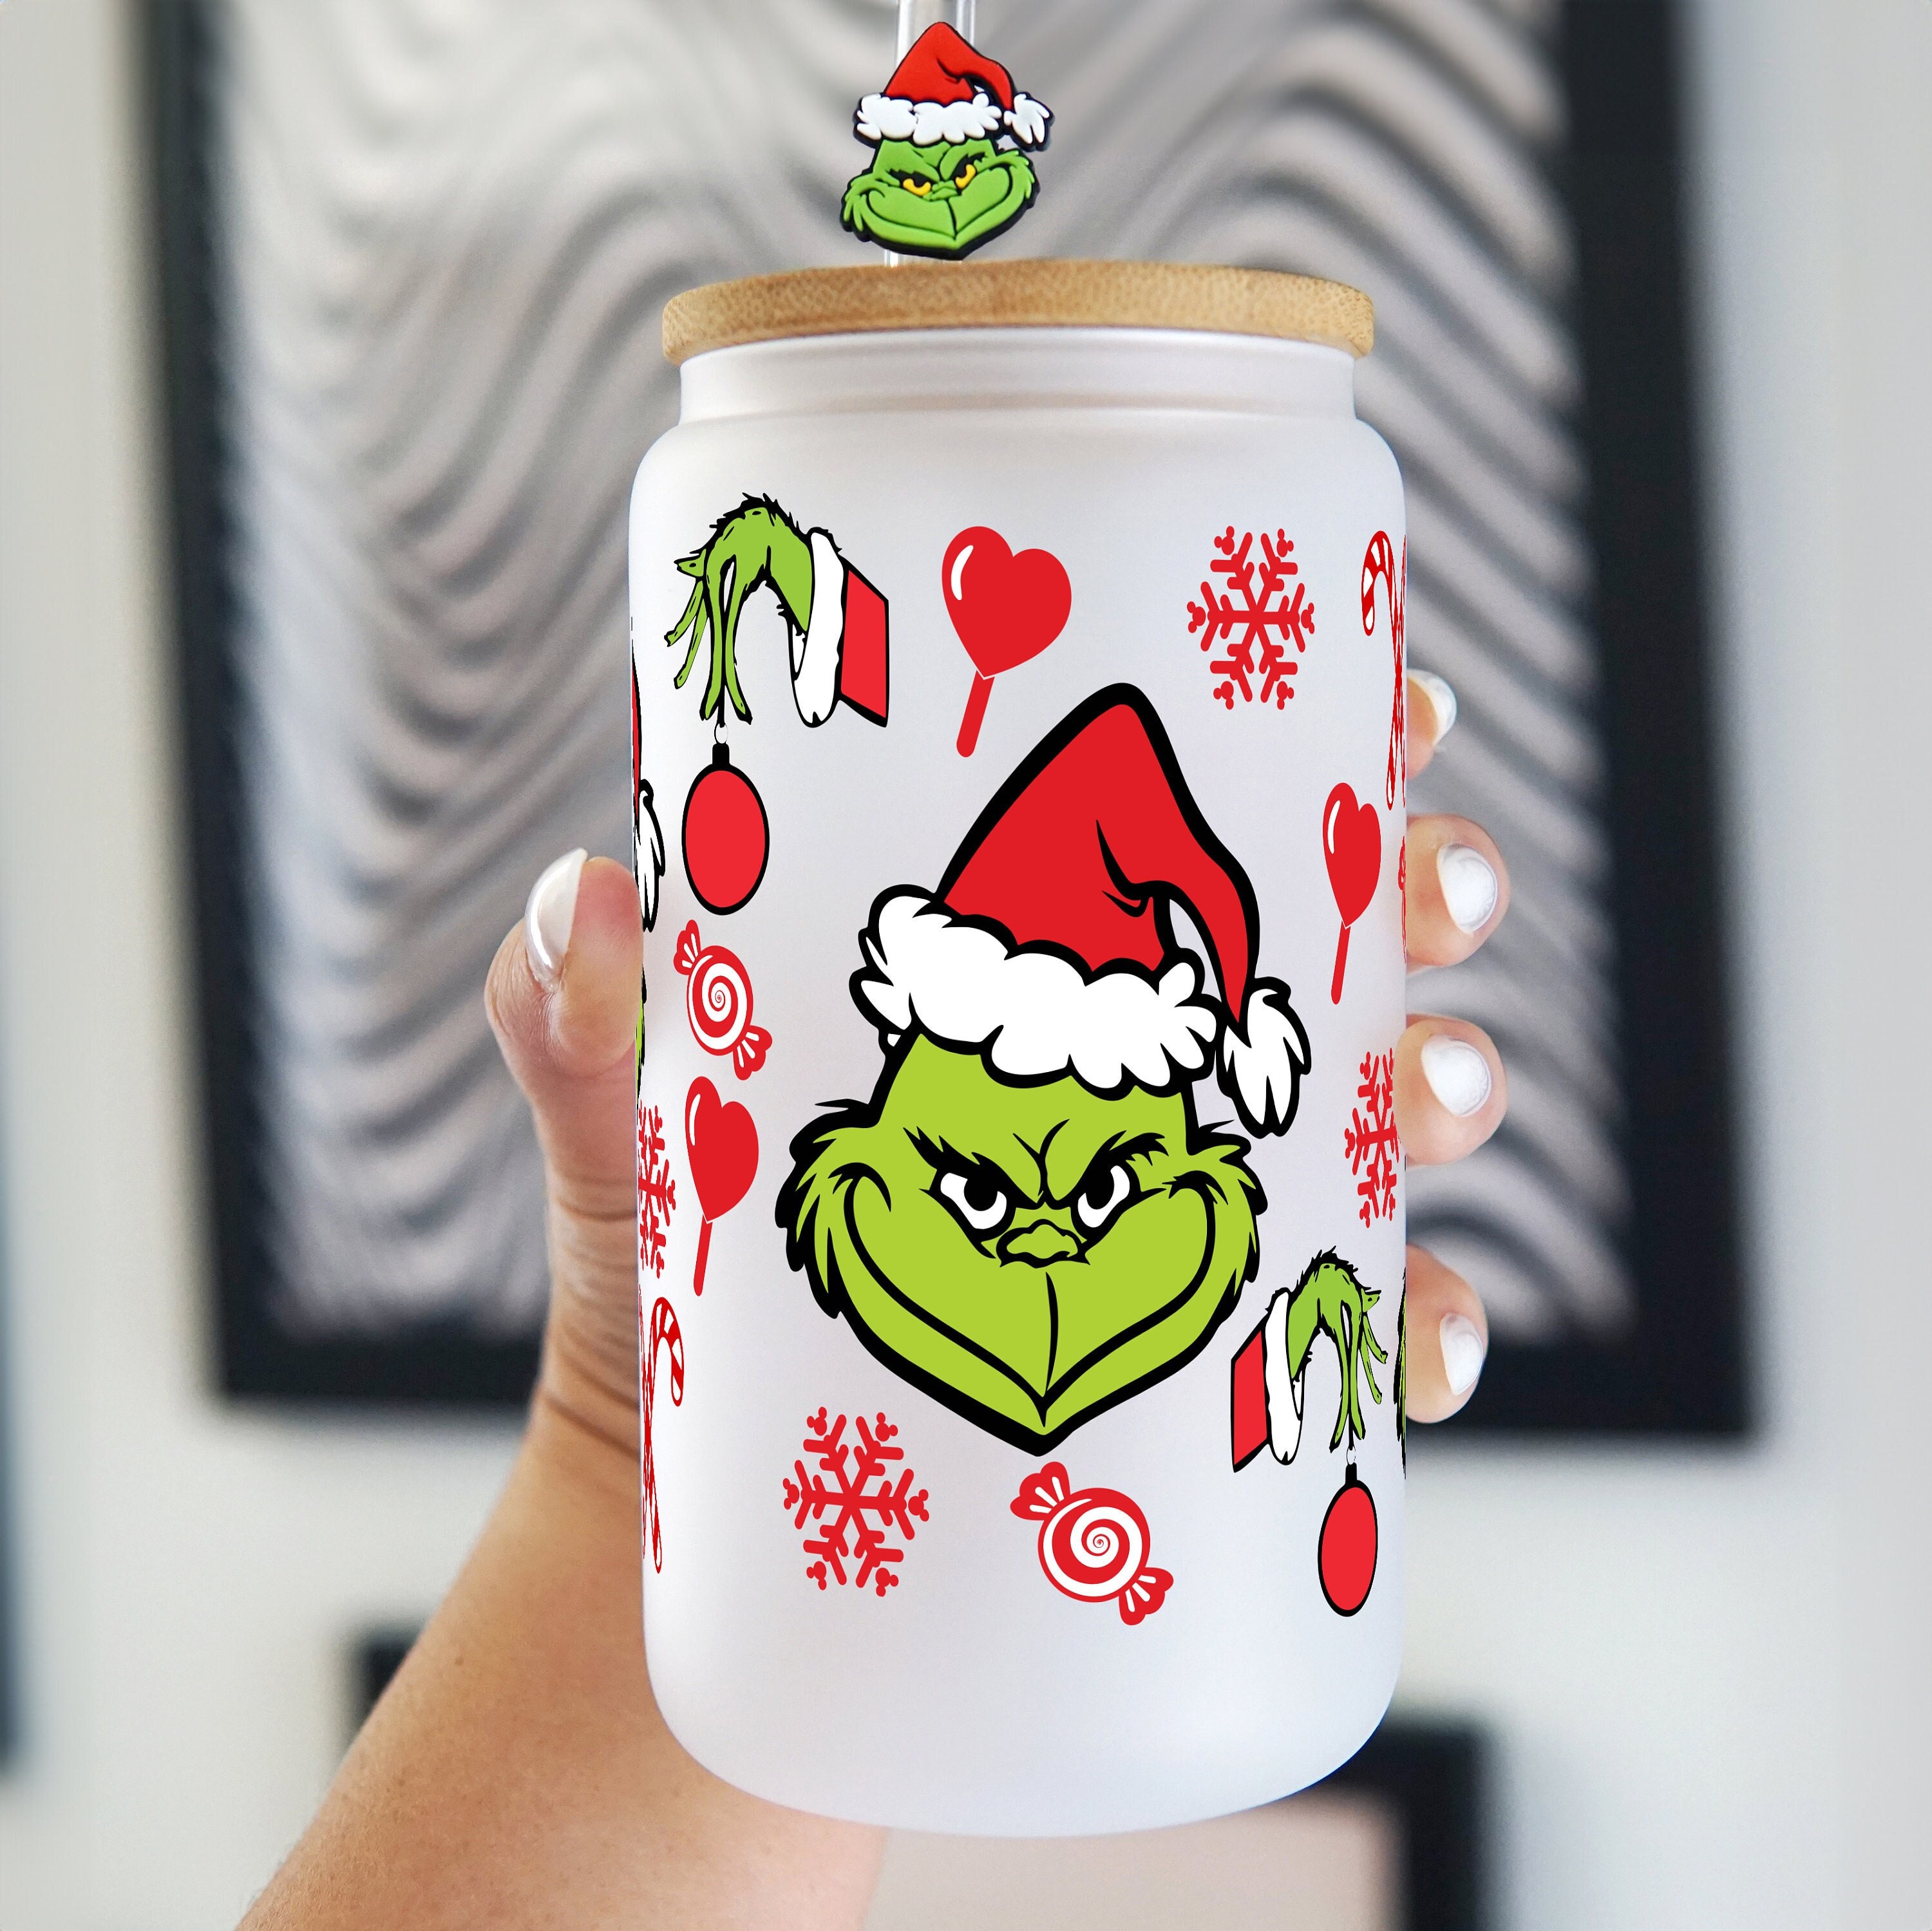  Arsemica Funny Grinch Mug, Novelty Christmas Coffee Mug, 11oz  Grinch Drinking Cup, Christmas Party Cups for Table Decorations, Xmas White  Elephant Gifts for Women Men Coworkers : Home & Kitchen